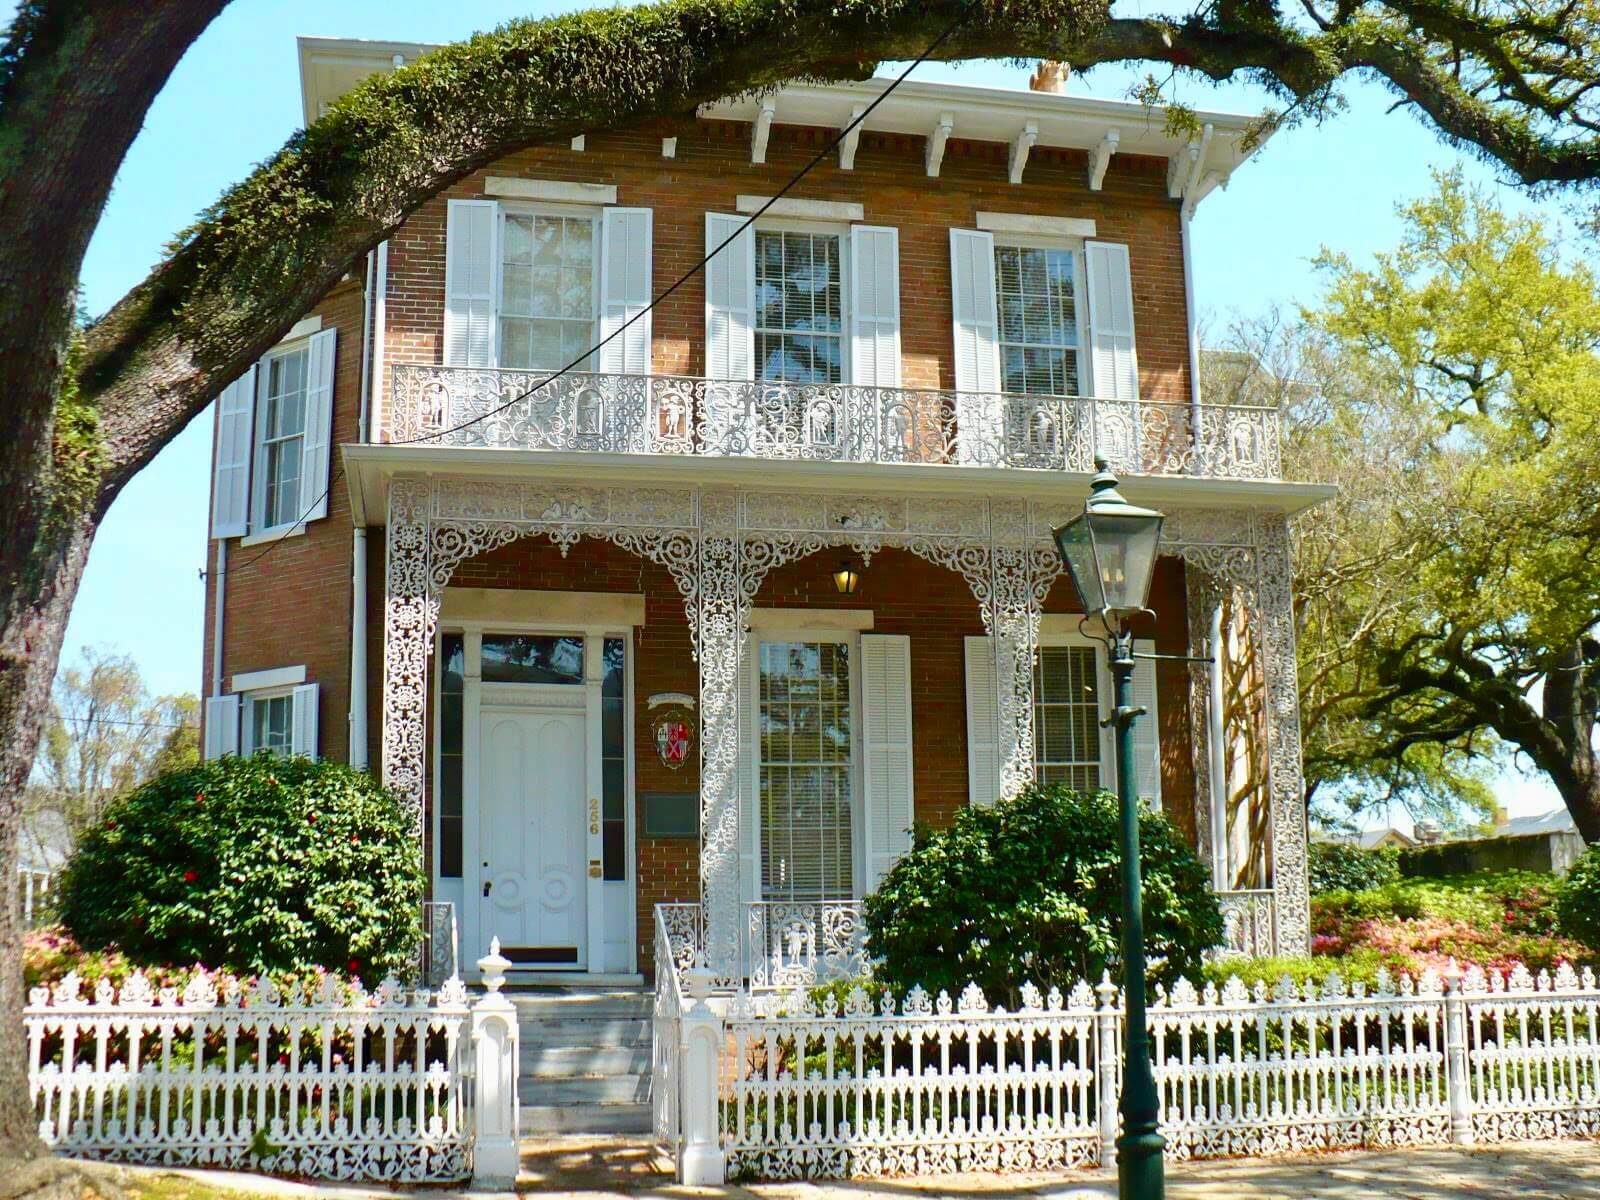 Richards dar house things to do in mobile al